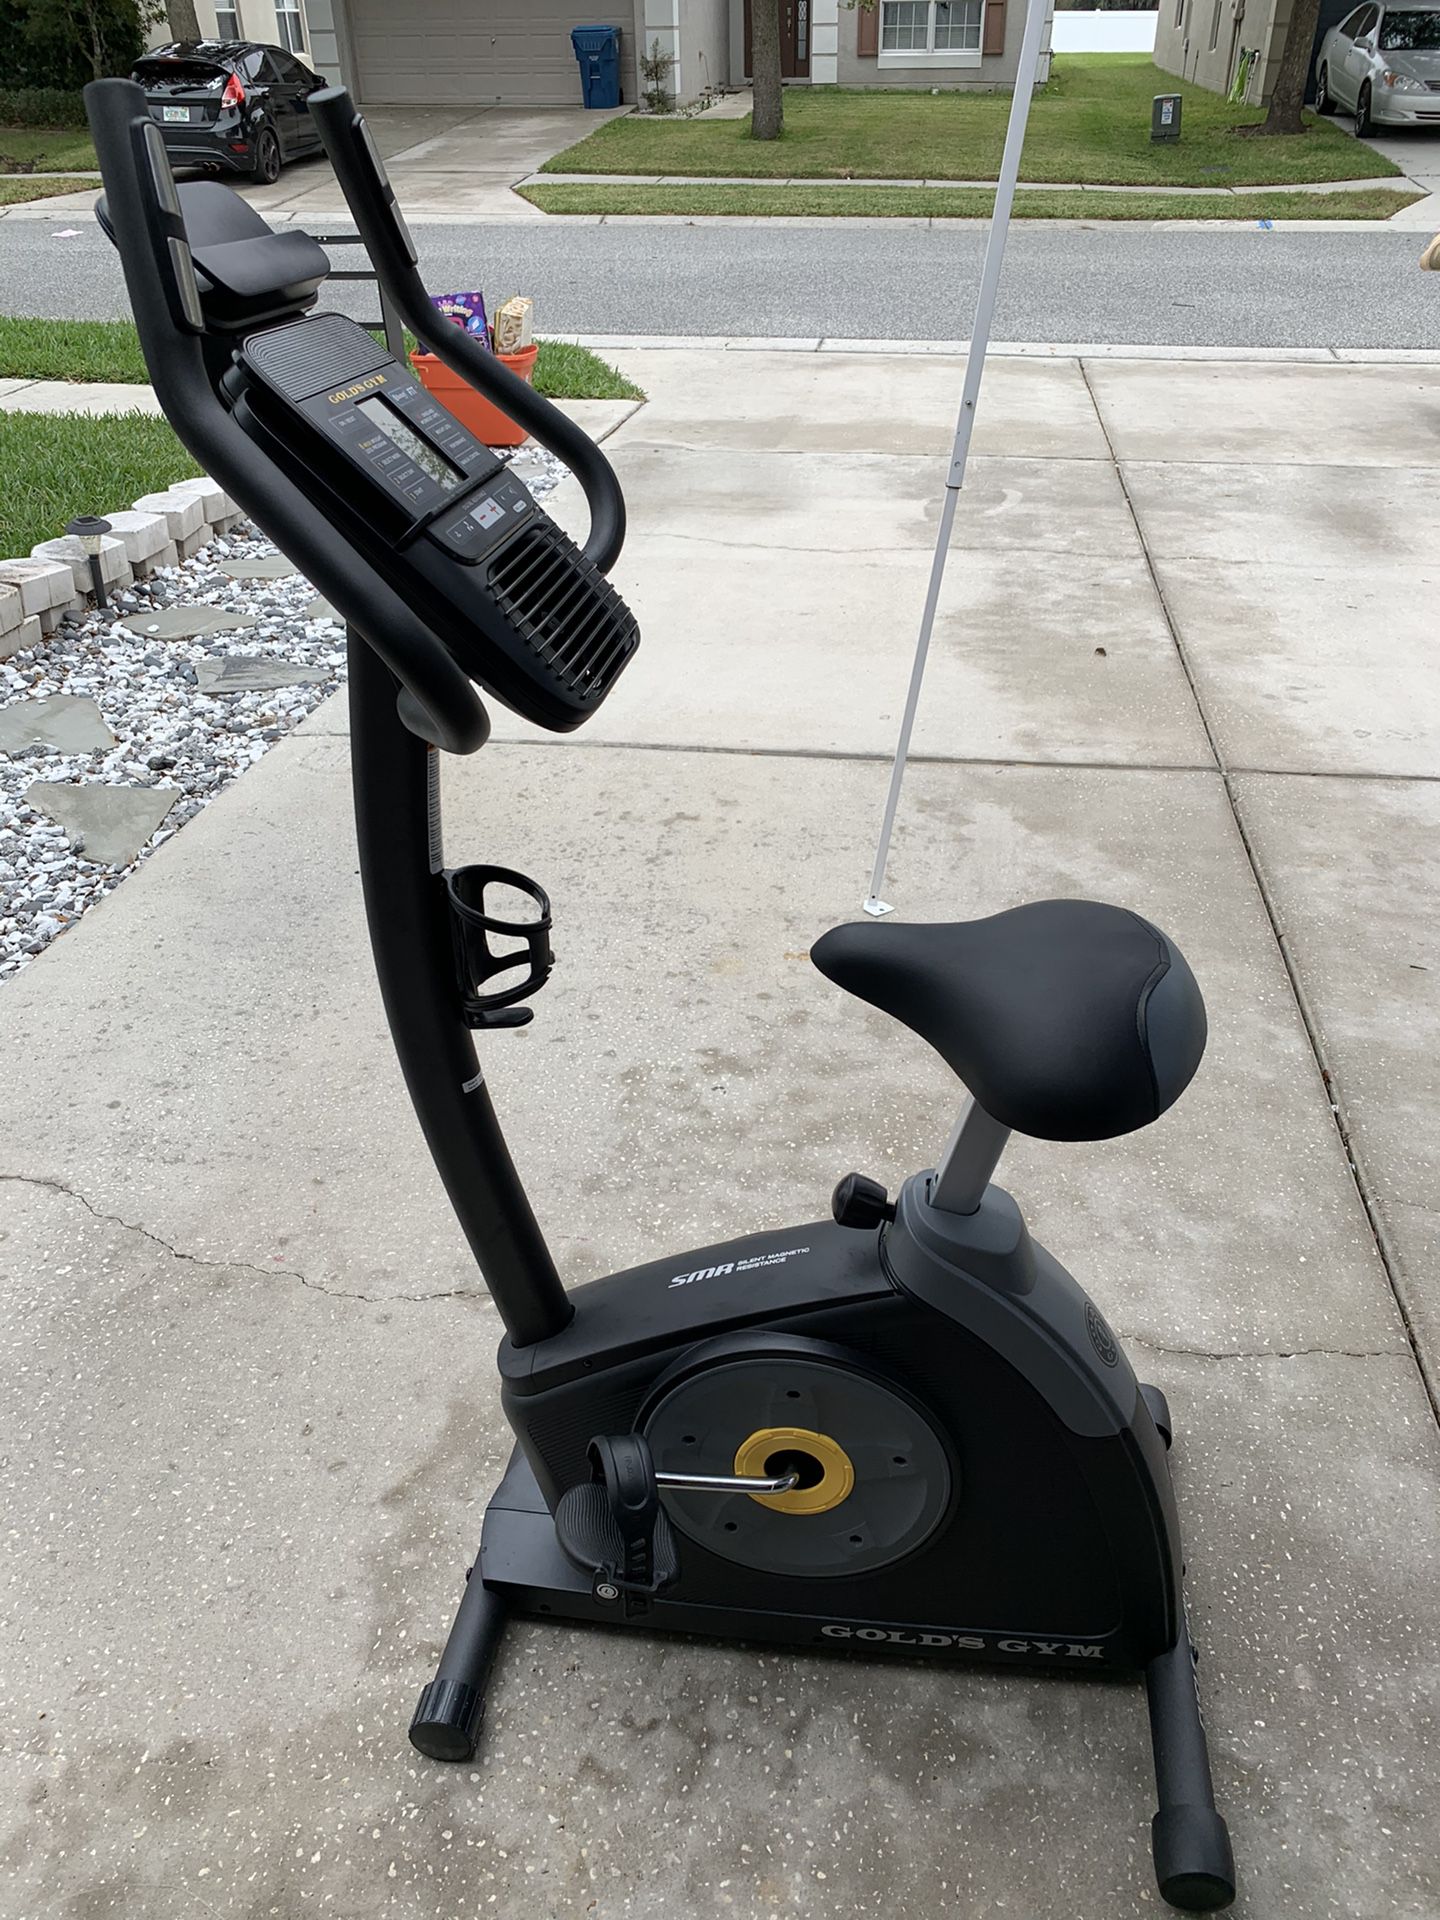 Golds gym exercise bike. Cycle trainer model # ggex61615.2